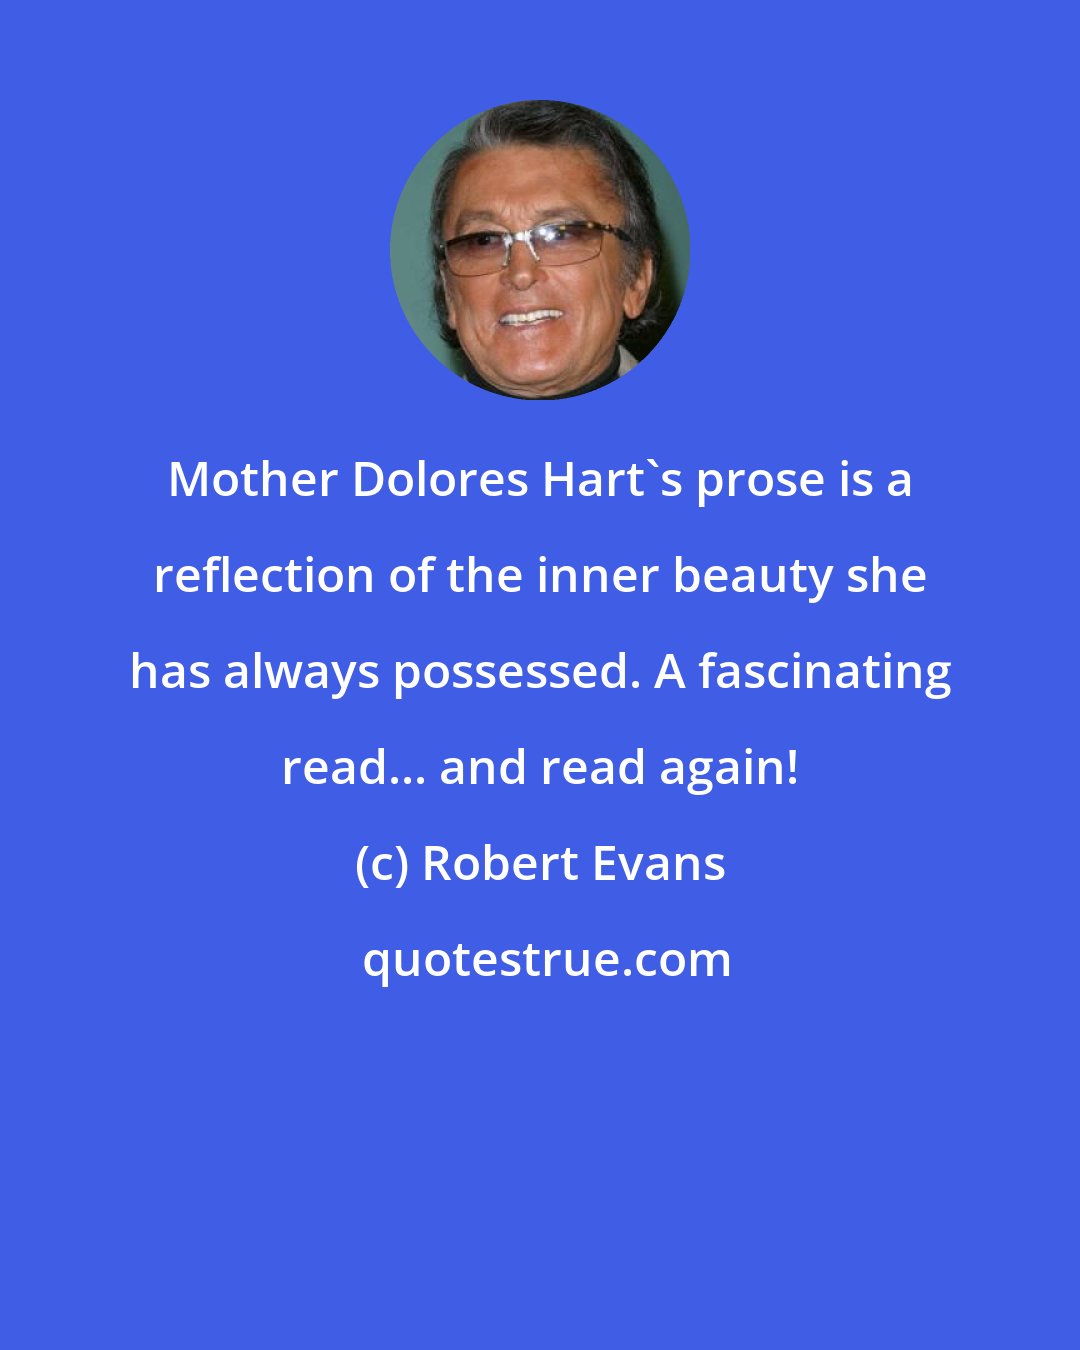 Robert Evans: Mother Dolores Hart's prose is a reflection of the inner beauty she has always possessed. A fascinating read... and read again!